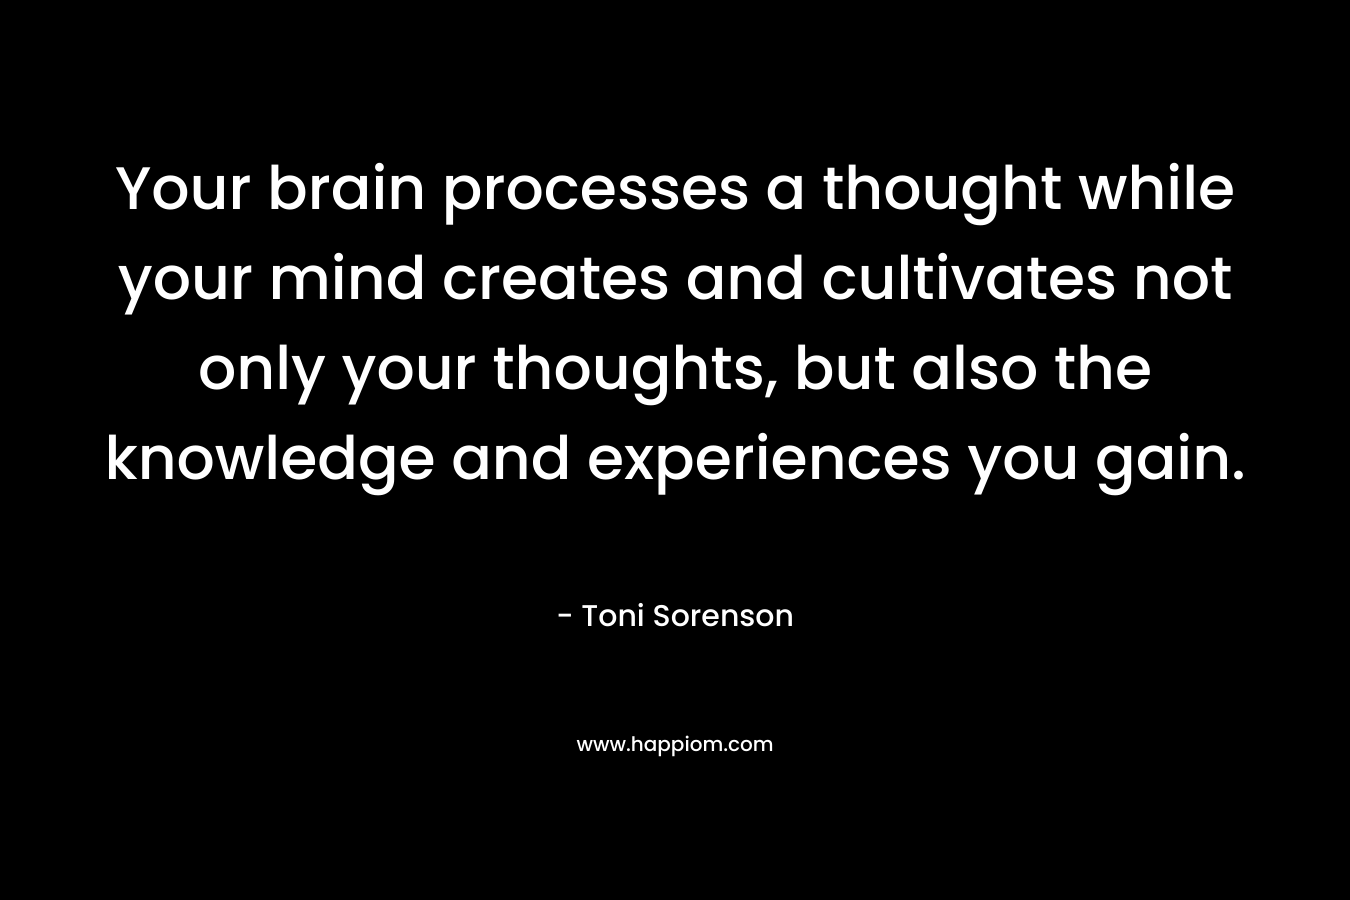 Your brain processes a thought while your mind creates and cultivates not only your thoughts, but also the knowledge and experiences you gain.